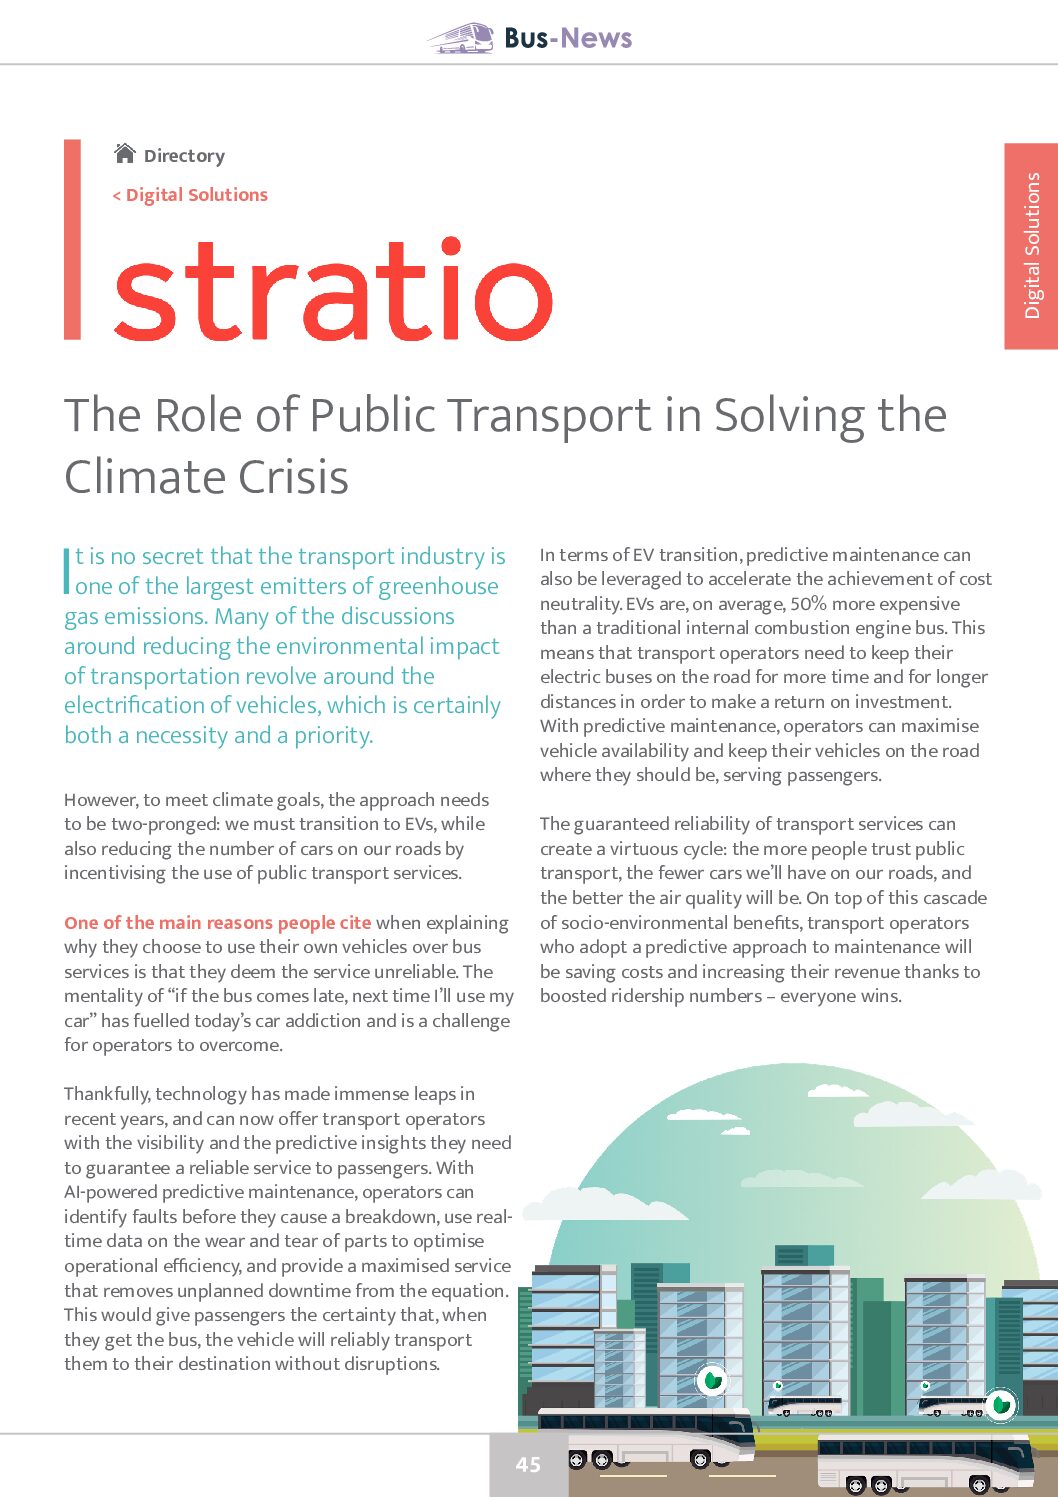 The Role of Public Transport in Solving the Climate Crisis